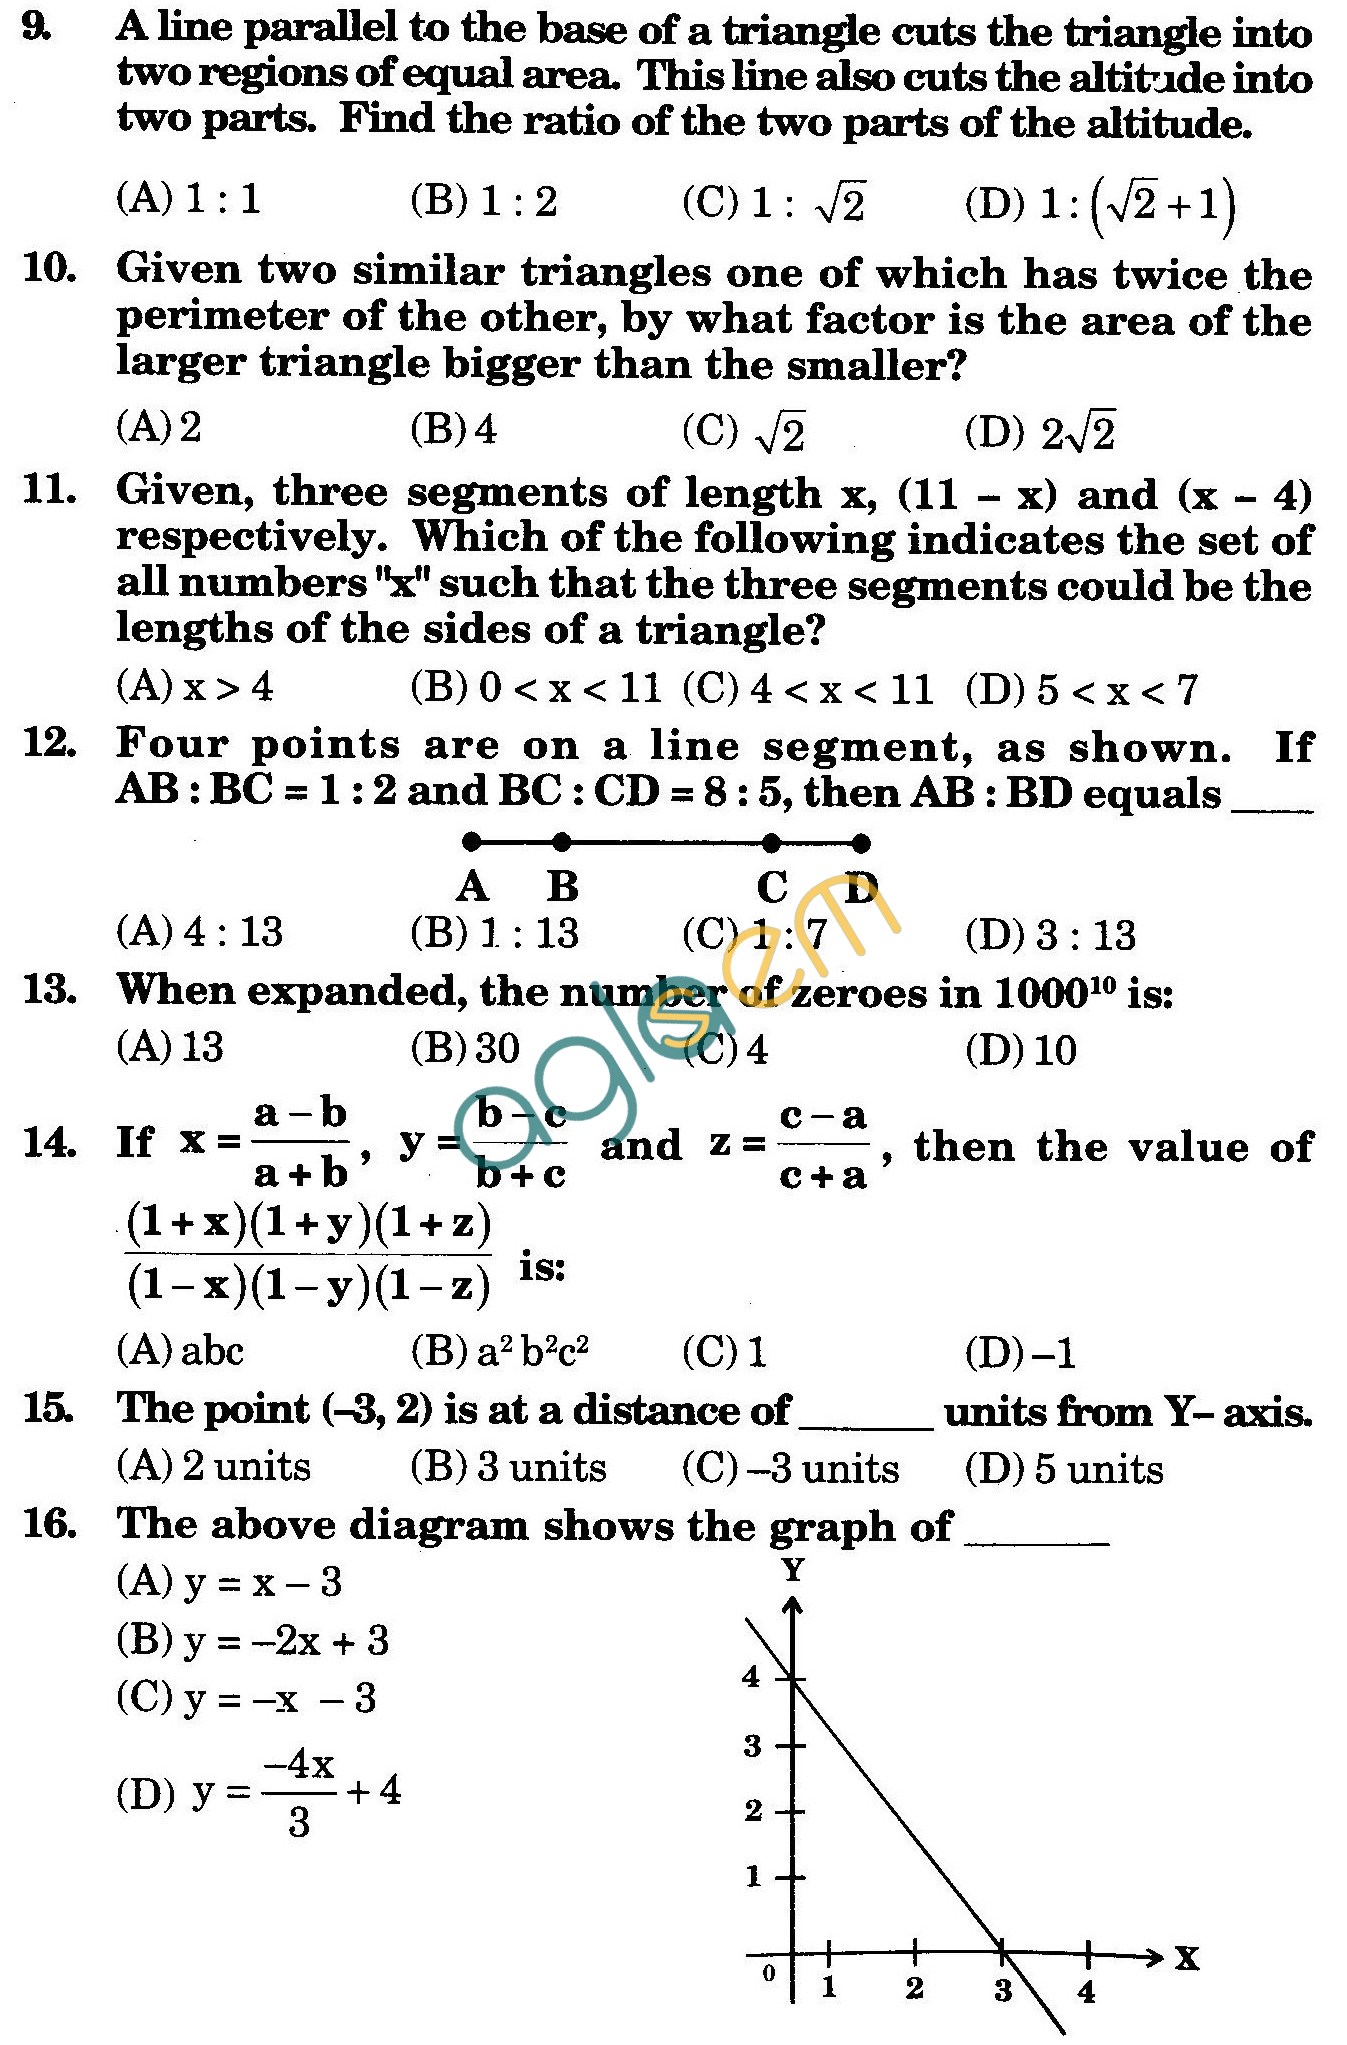 NSTSE 2009 Class IX Question Paper with Answers - Mathematics